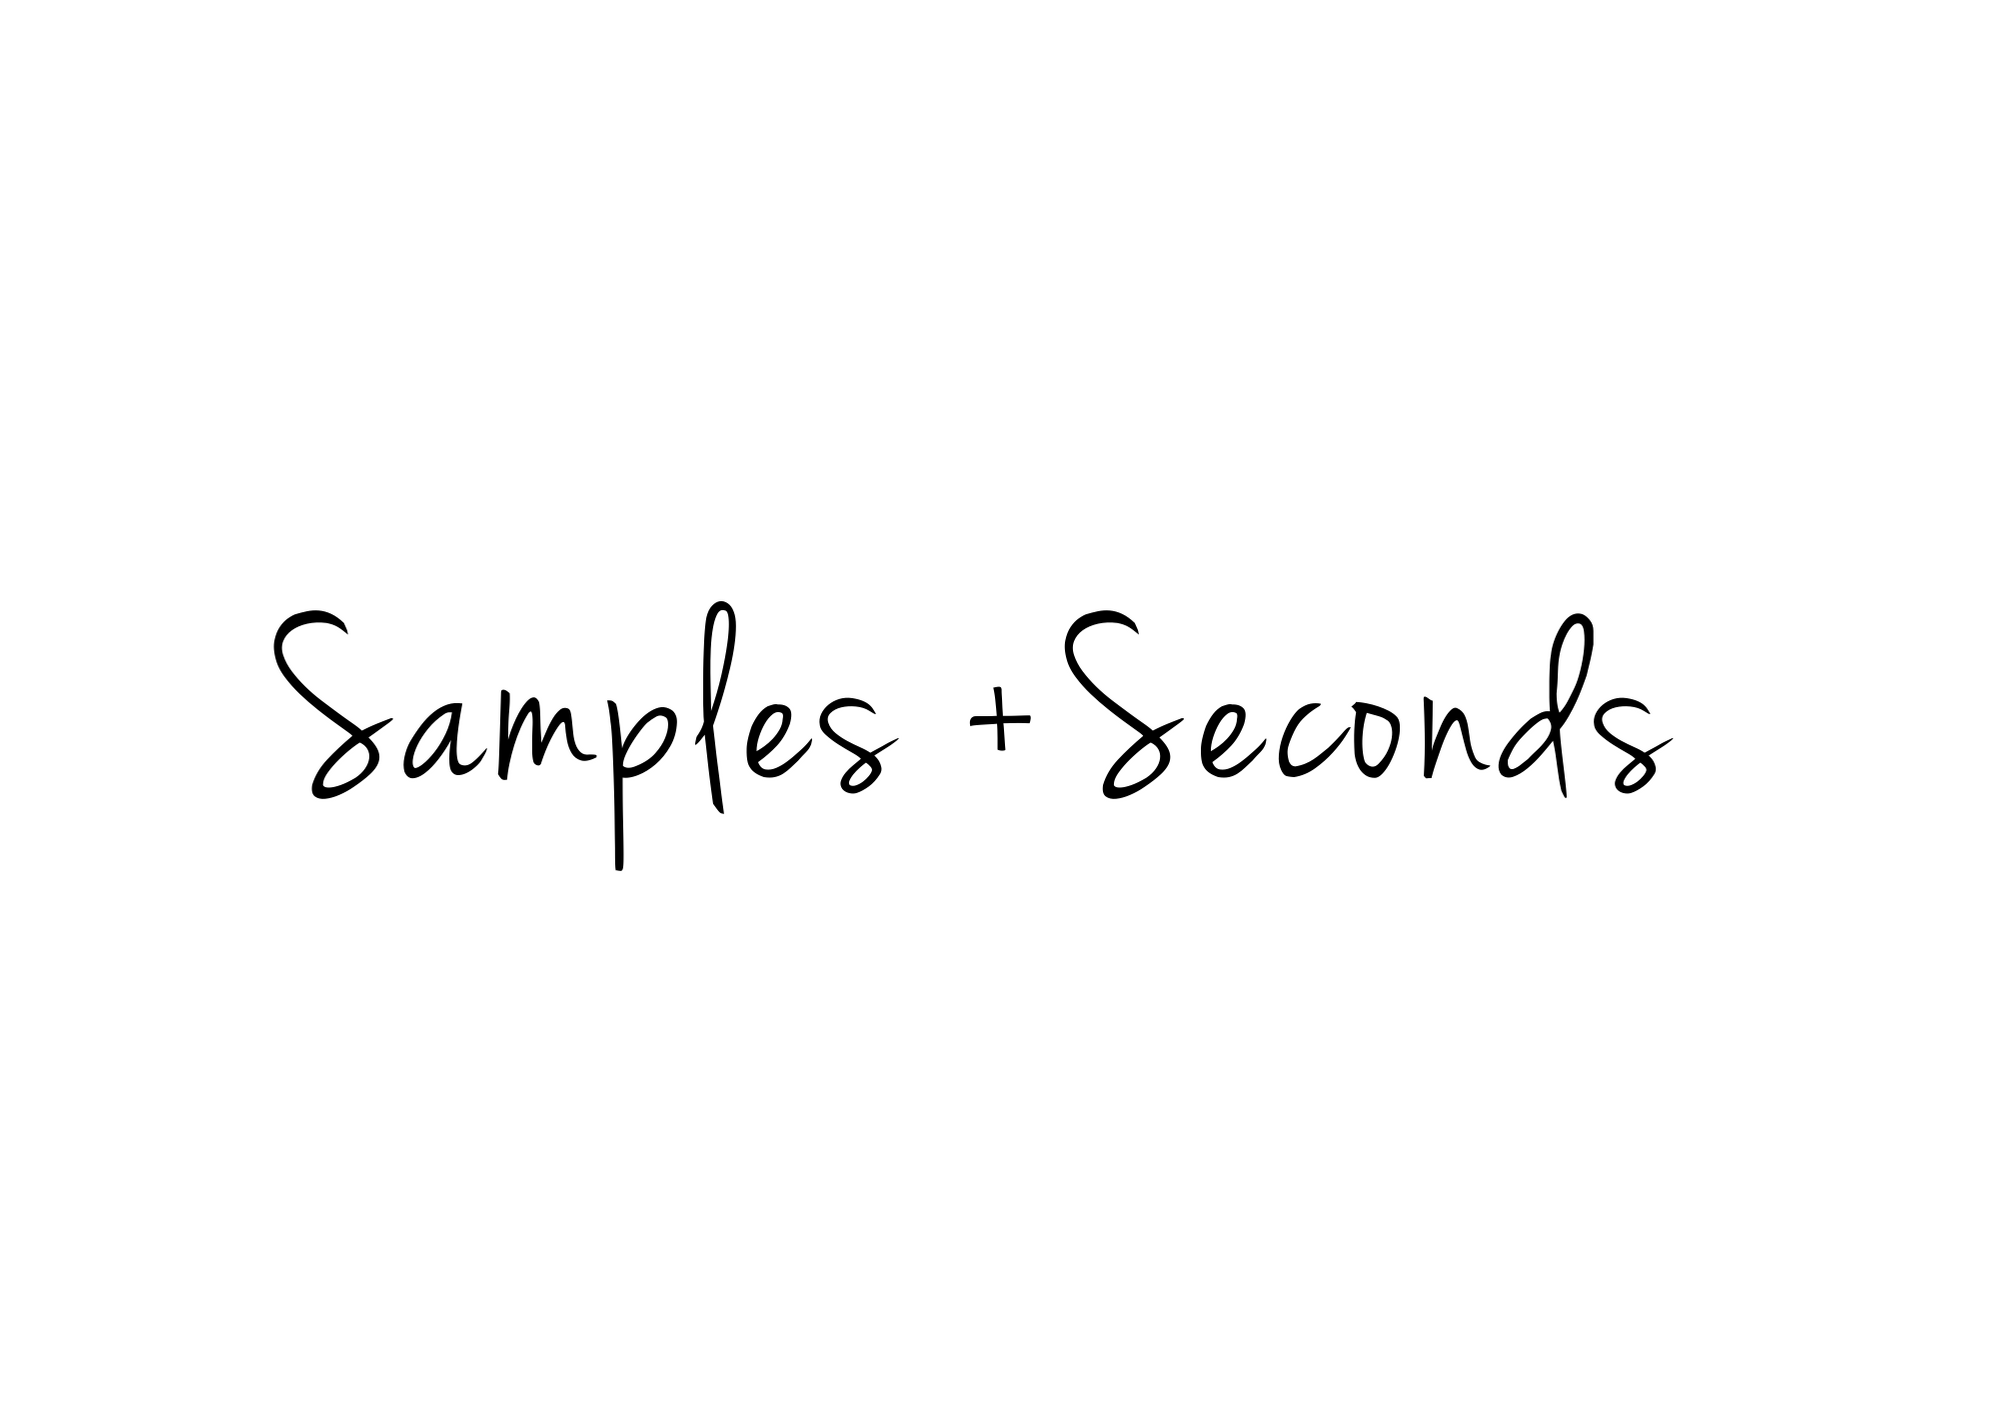 Samples & Seconds